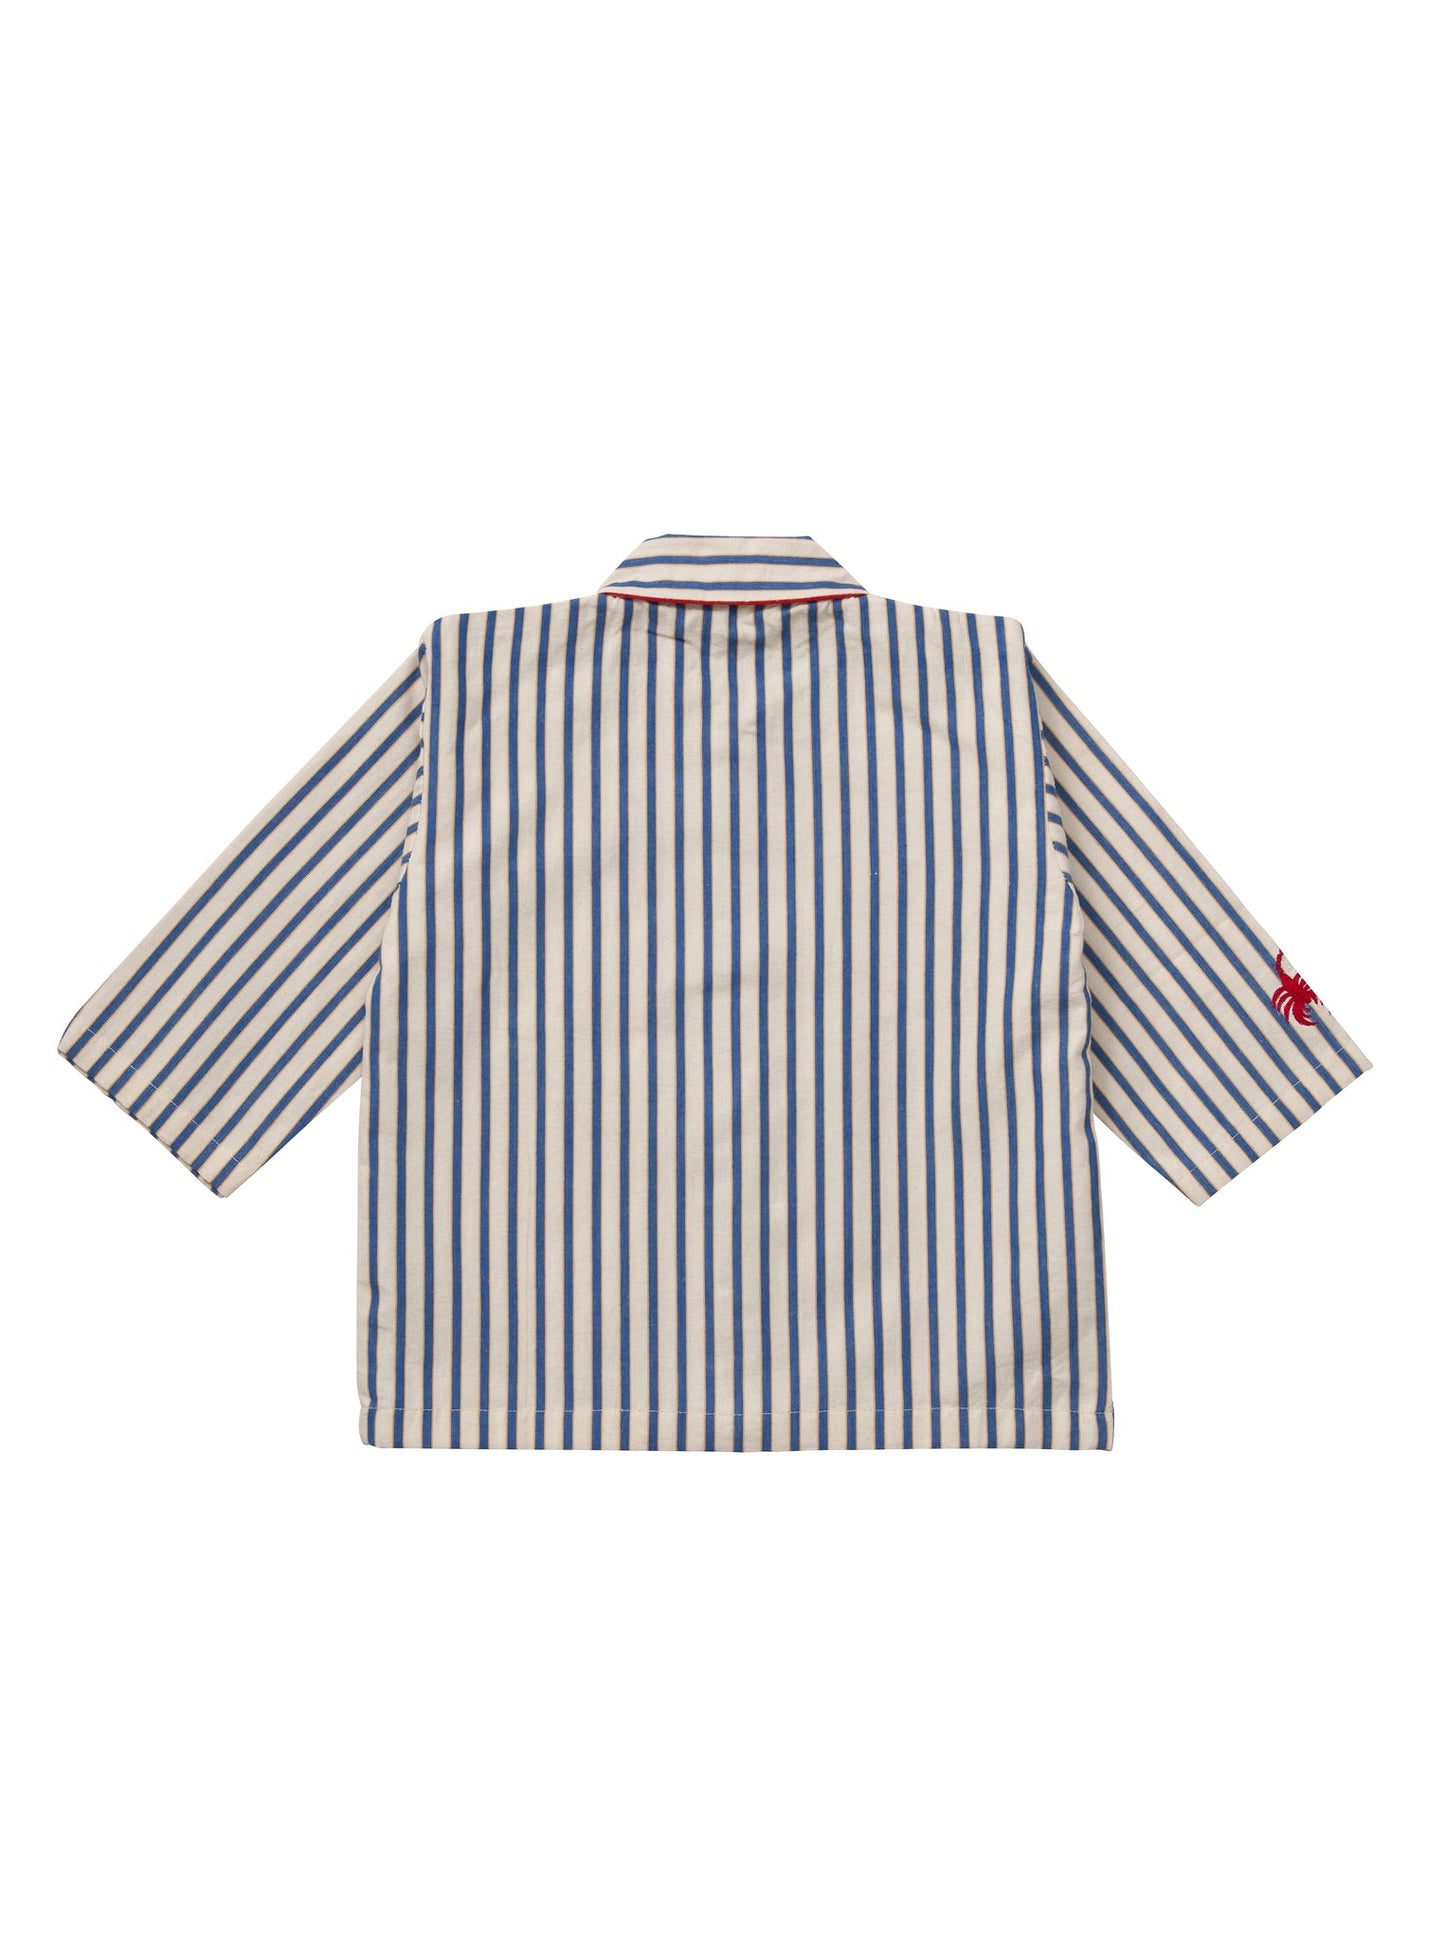 Rear top. Traditional white and blue striped children's pyjamas made in soft brushed cotton with red piping and scorpion motifs. 